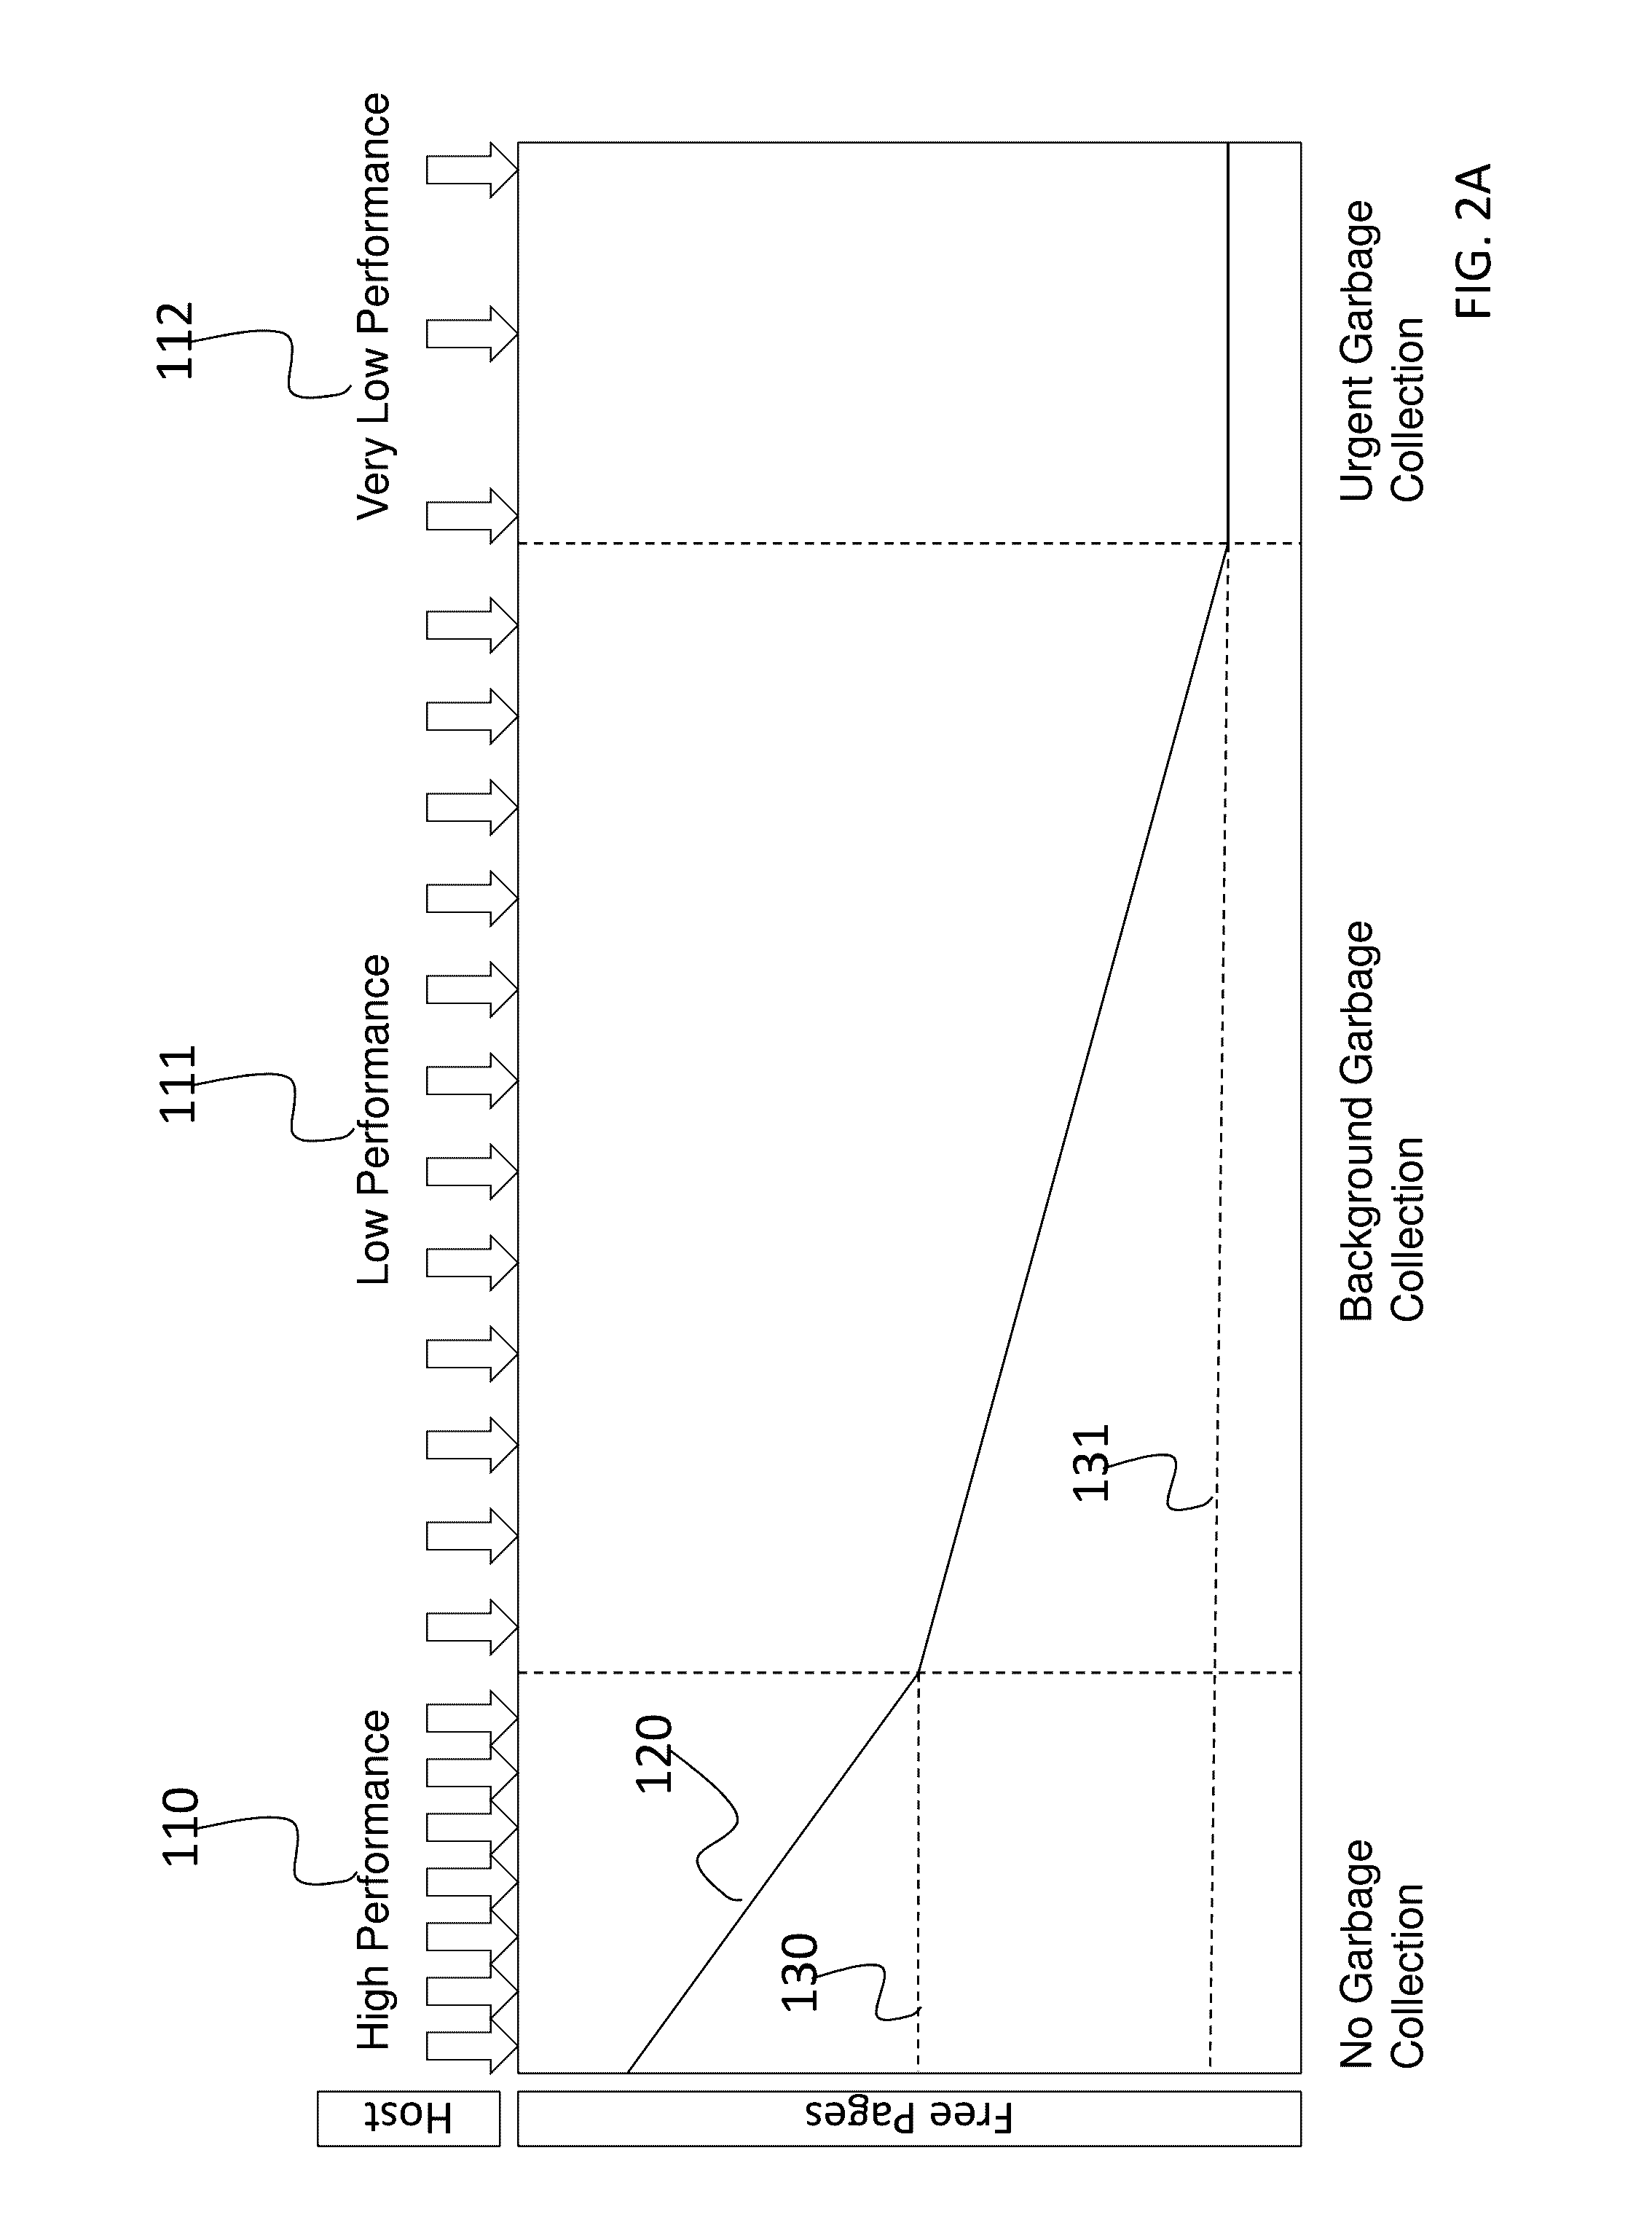 Pool level garbage collection and wear leveling of solid state devices